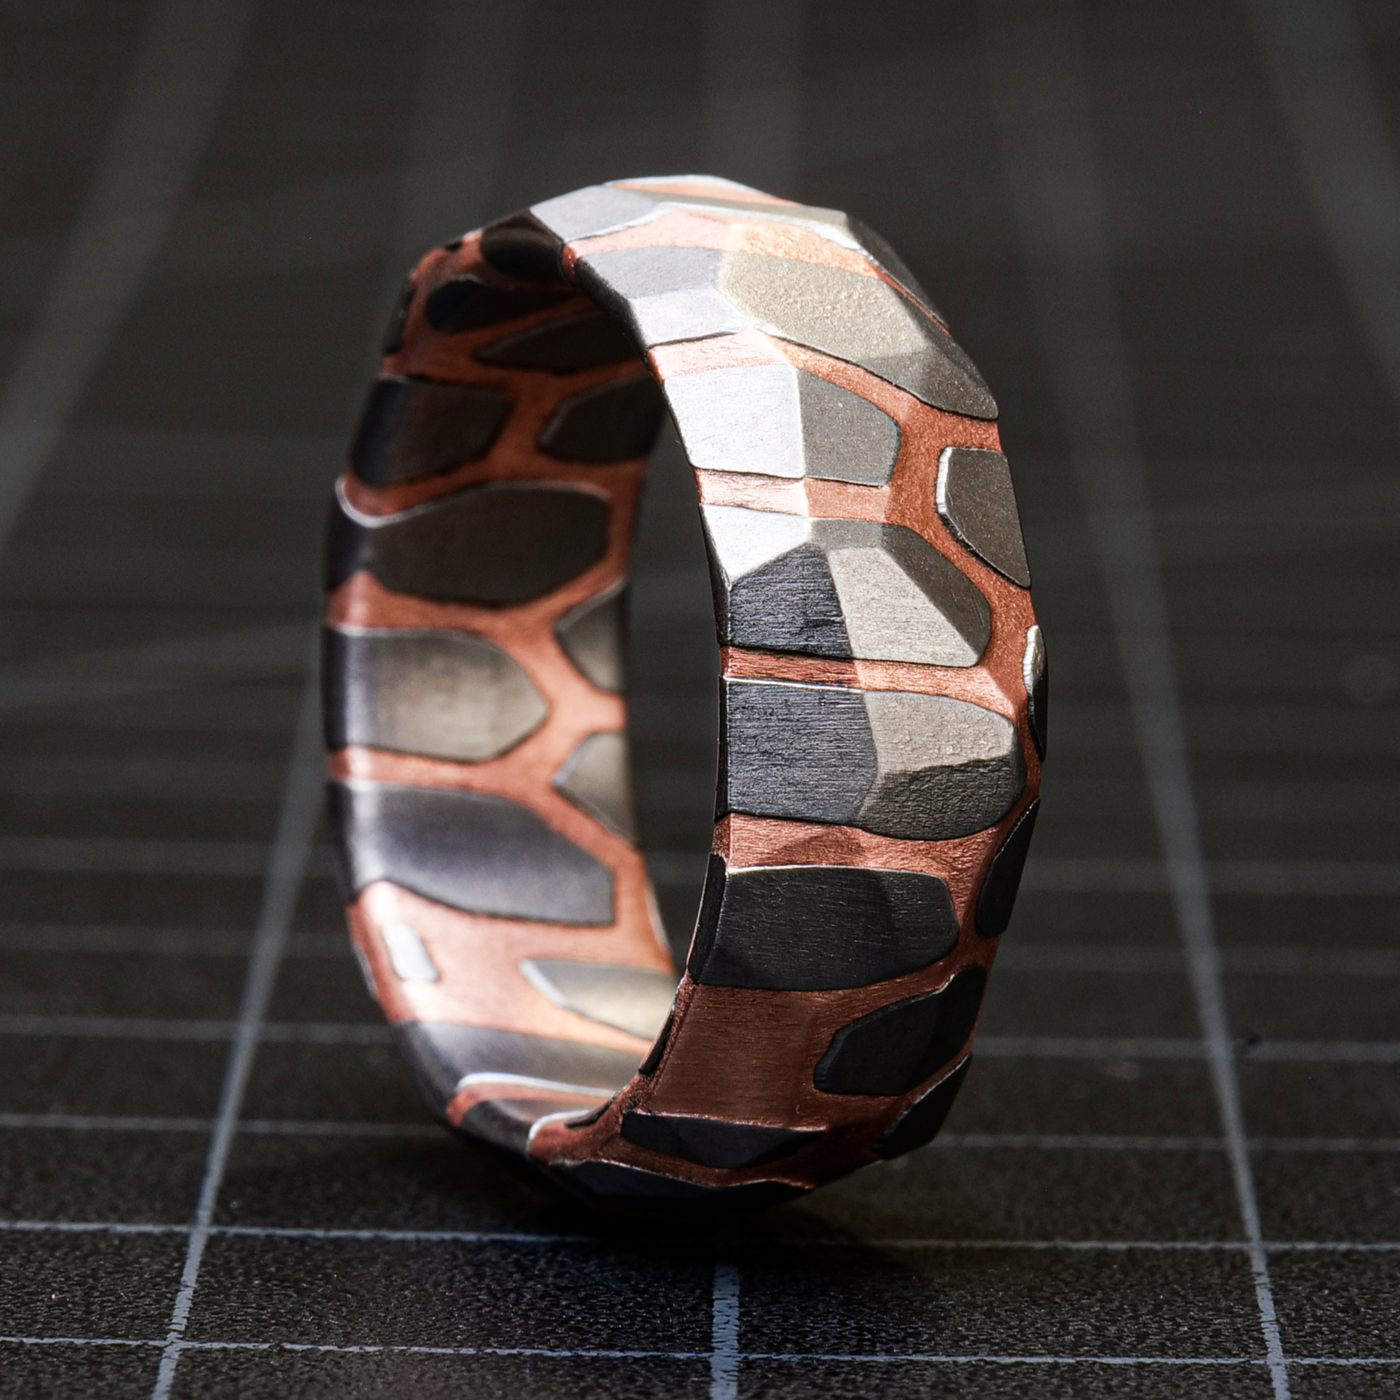 Buy Etched Superconductor Ring Custom Made Titanium-niobium and Copper  Band, Hammered Ring Men, Faceted Superconductor Band, Mens Wedding Band  Online in India - Etsy